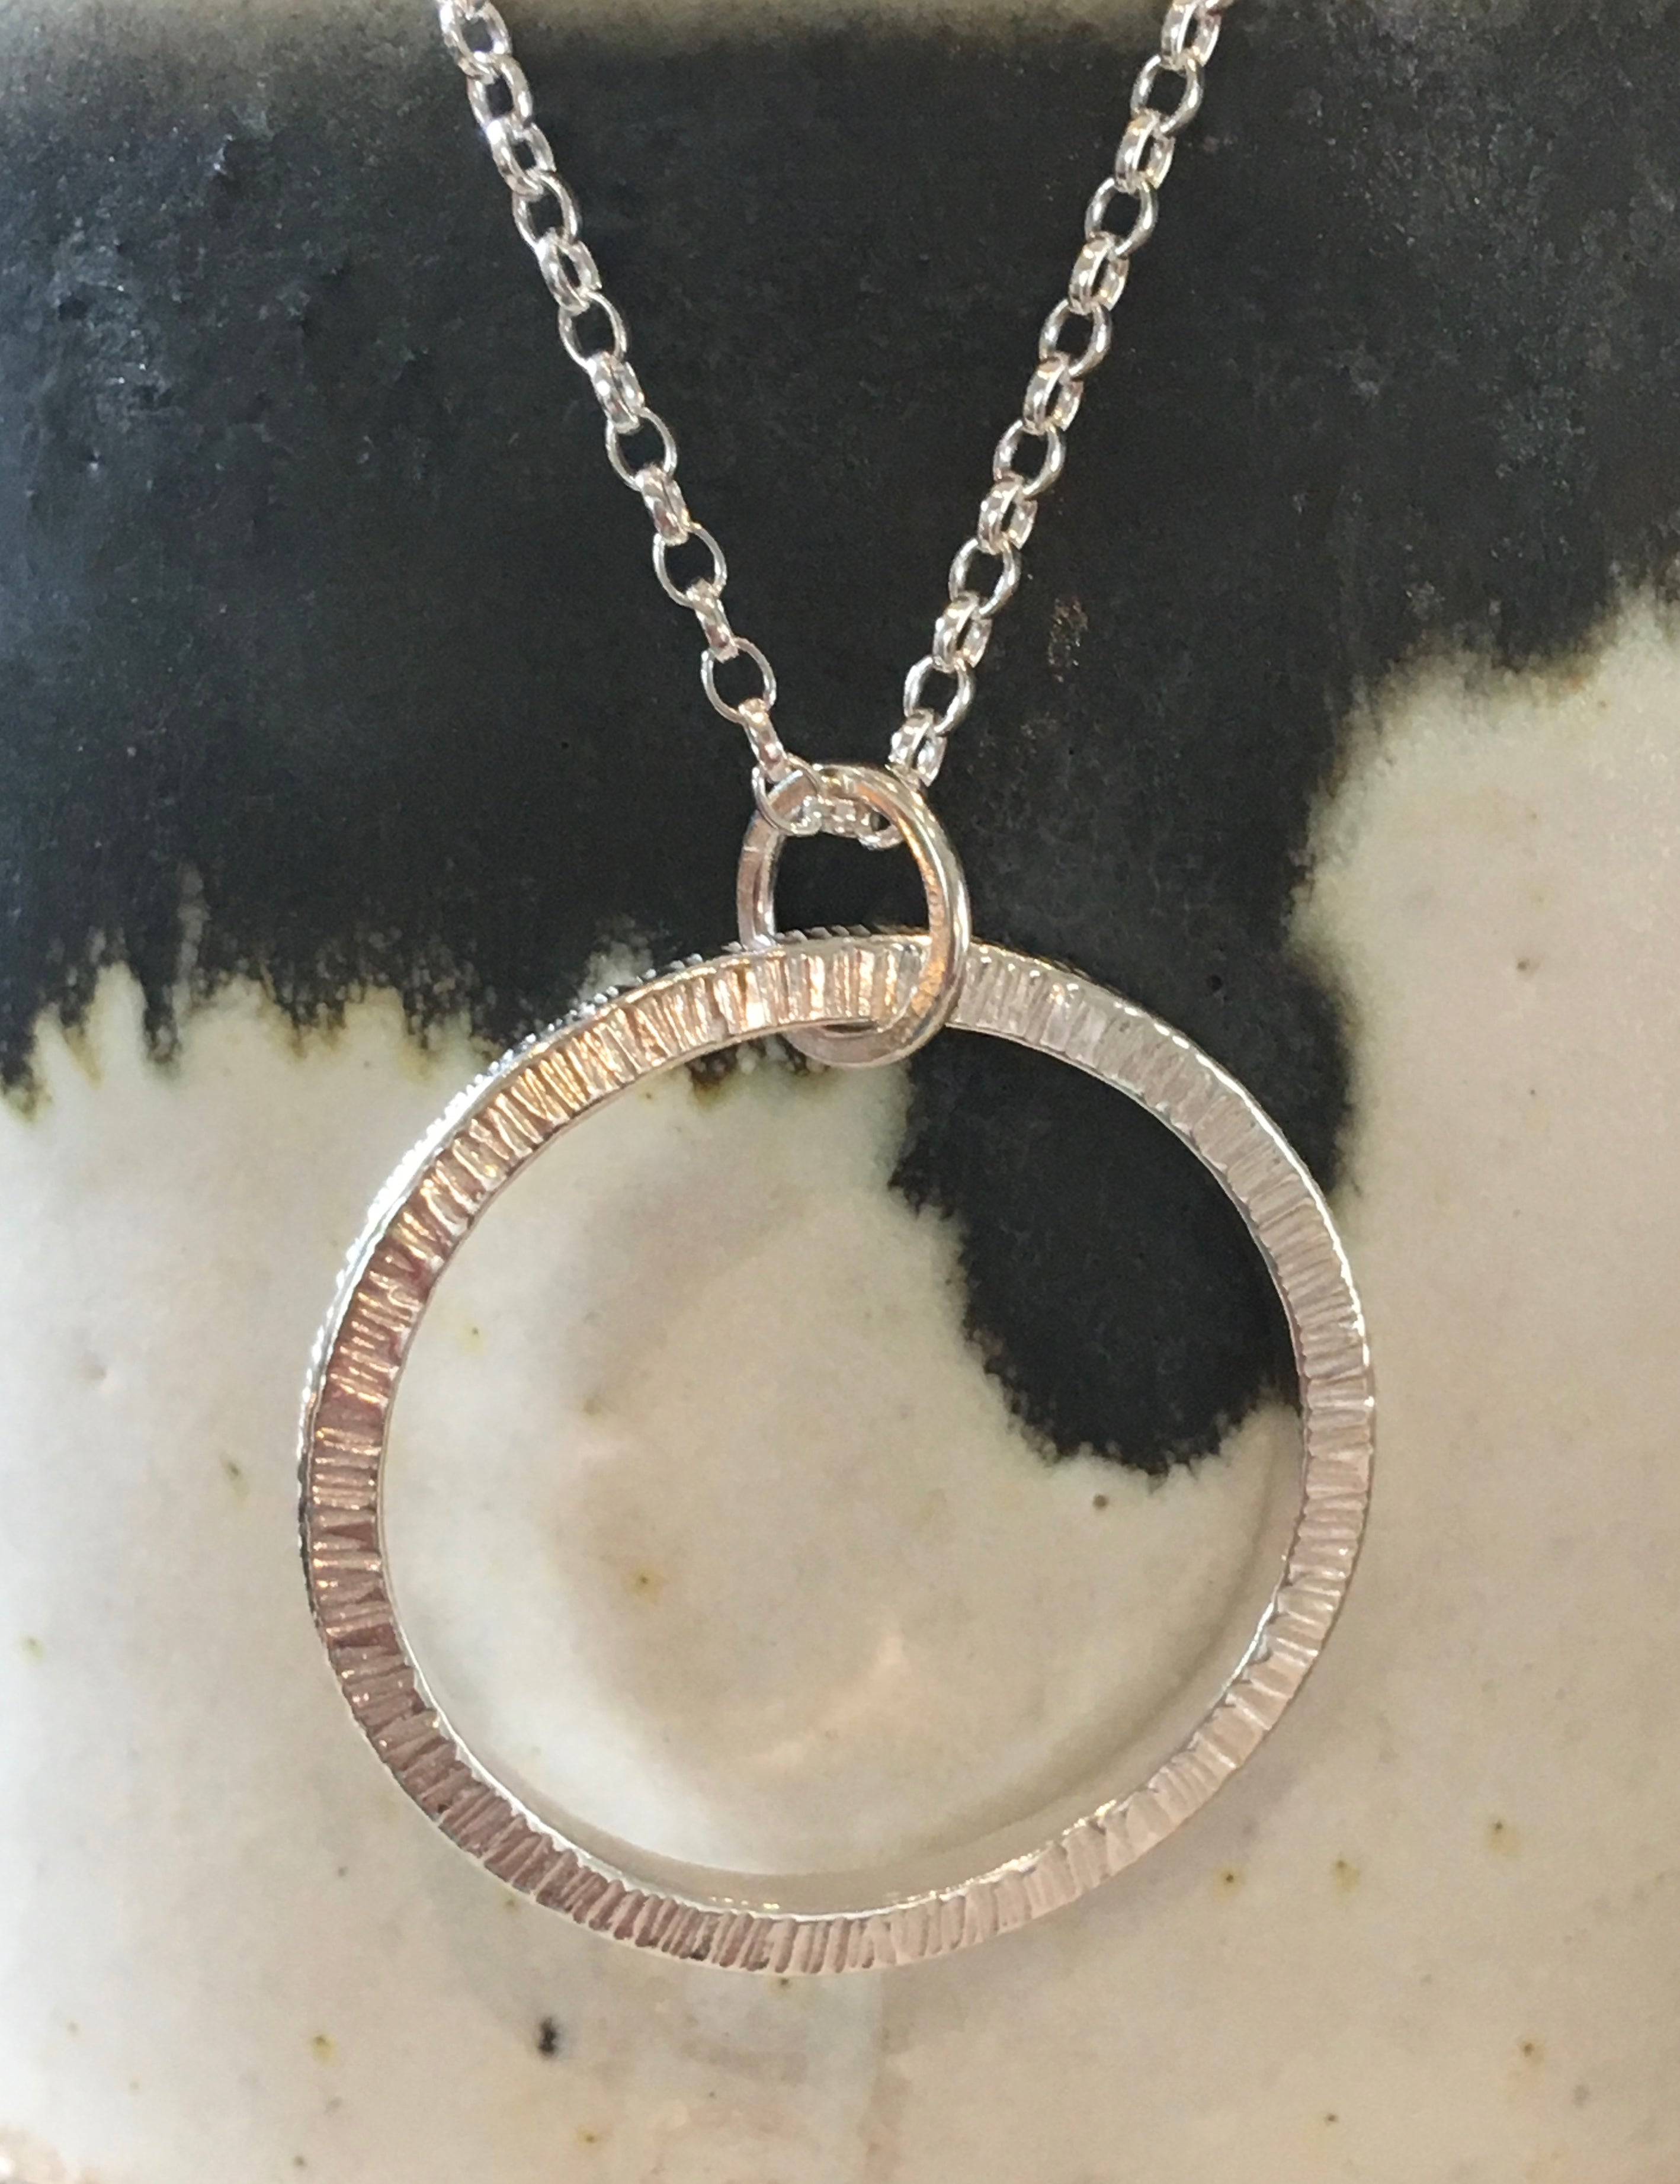 Driftwood pattern, silver circular necklace.